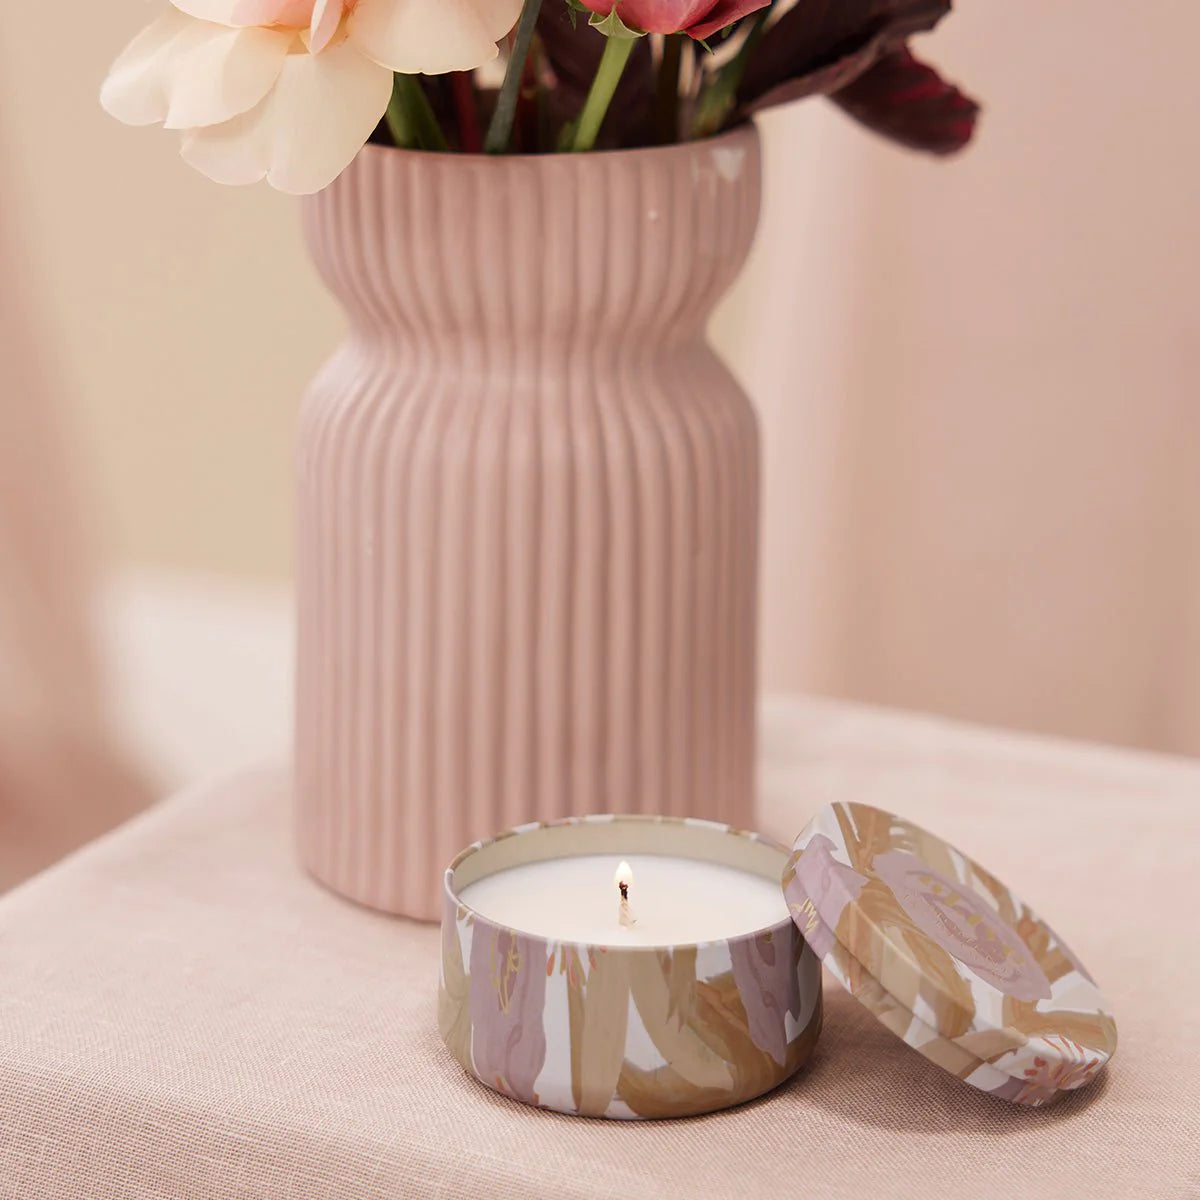 LIMITED EDITION Mini Soy Candle - A Moment To Bloom